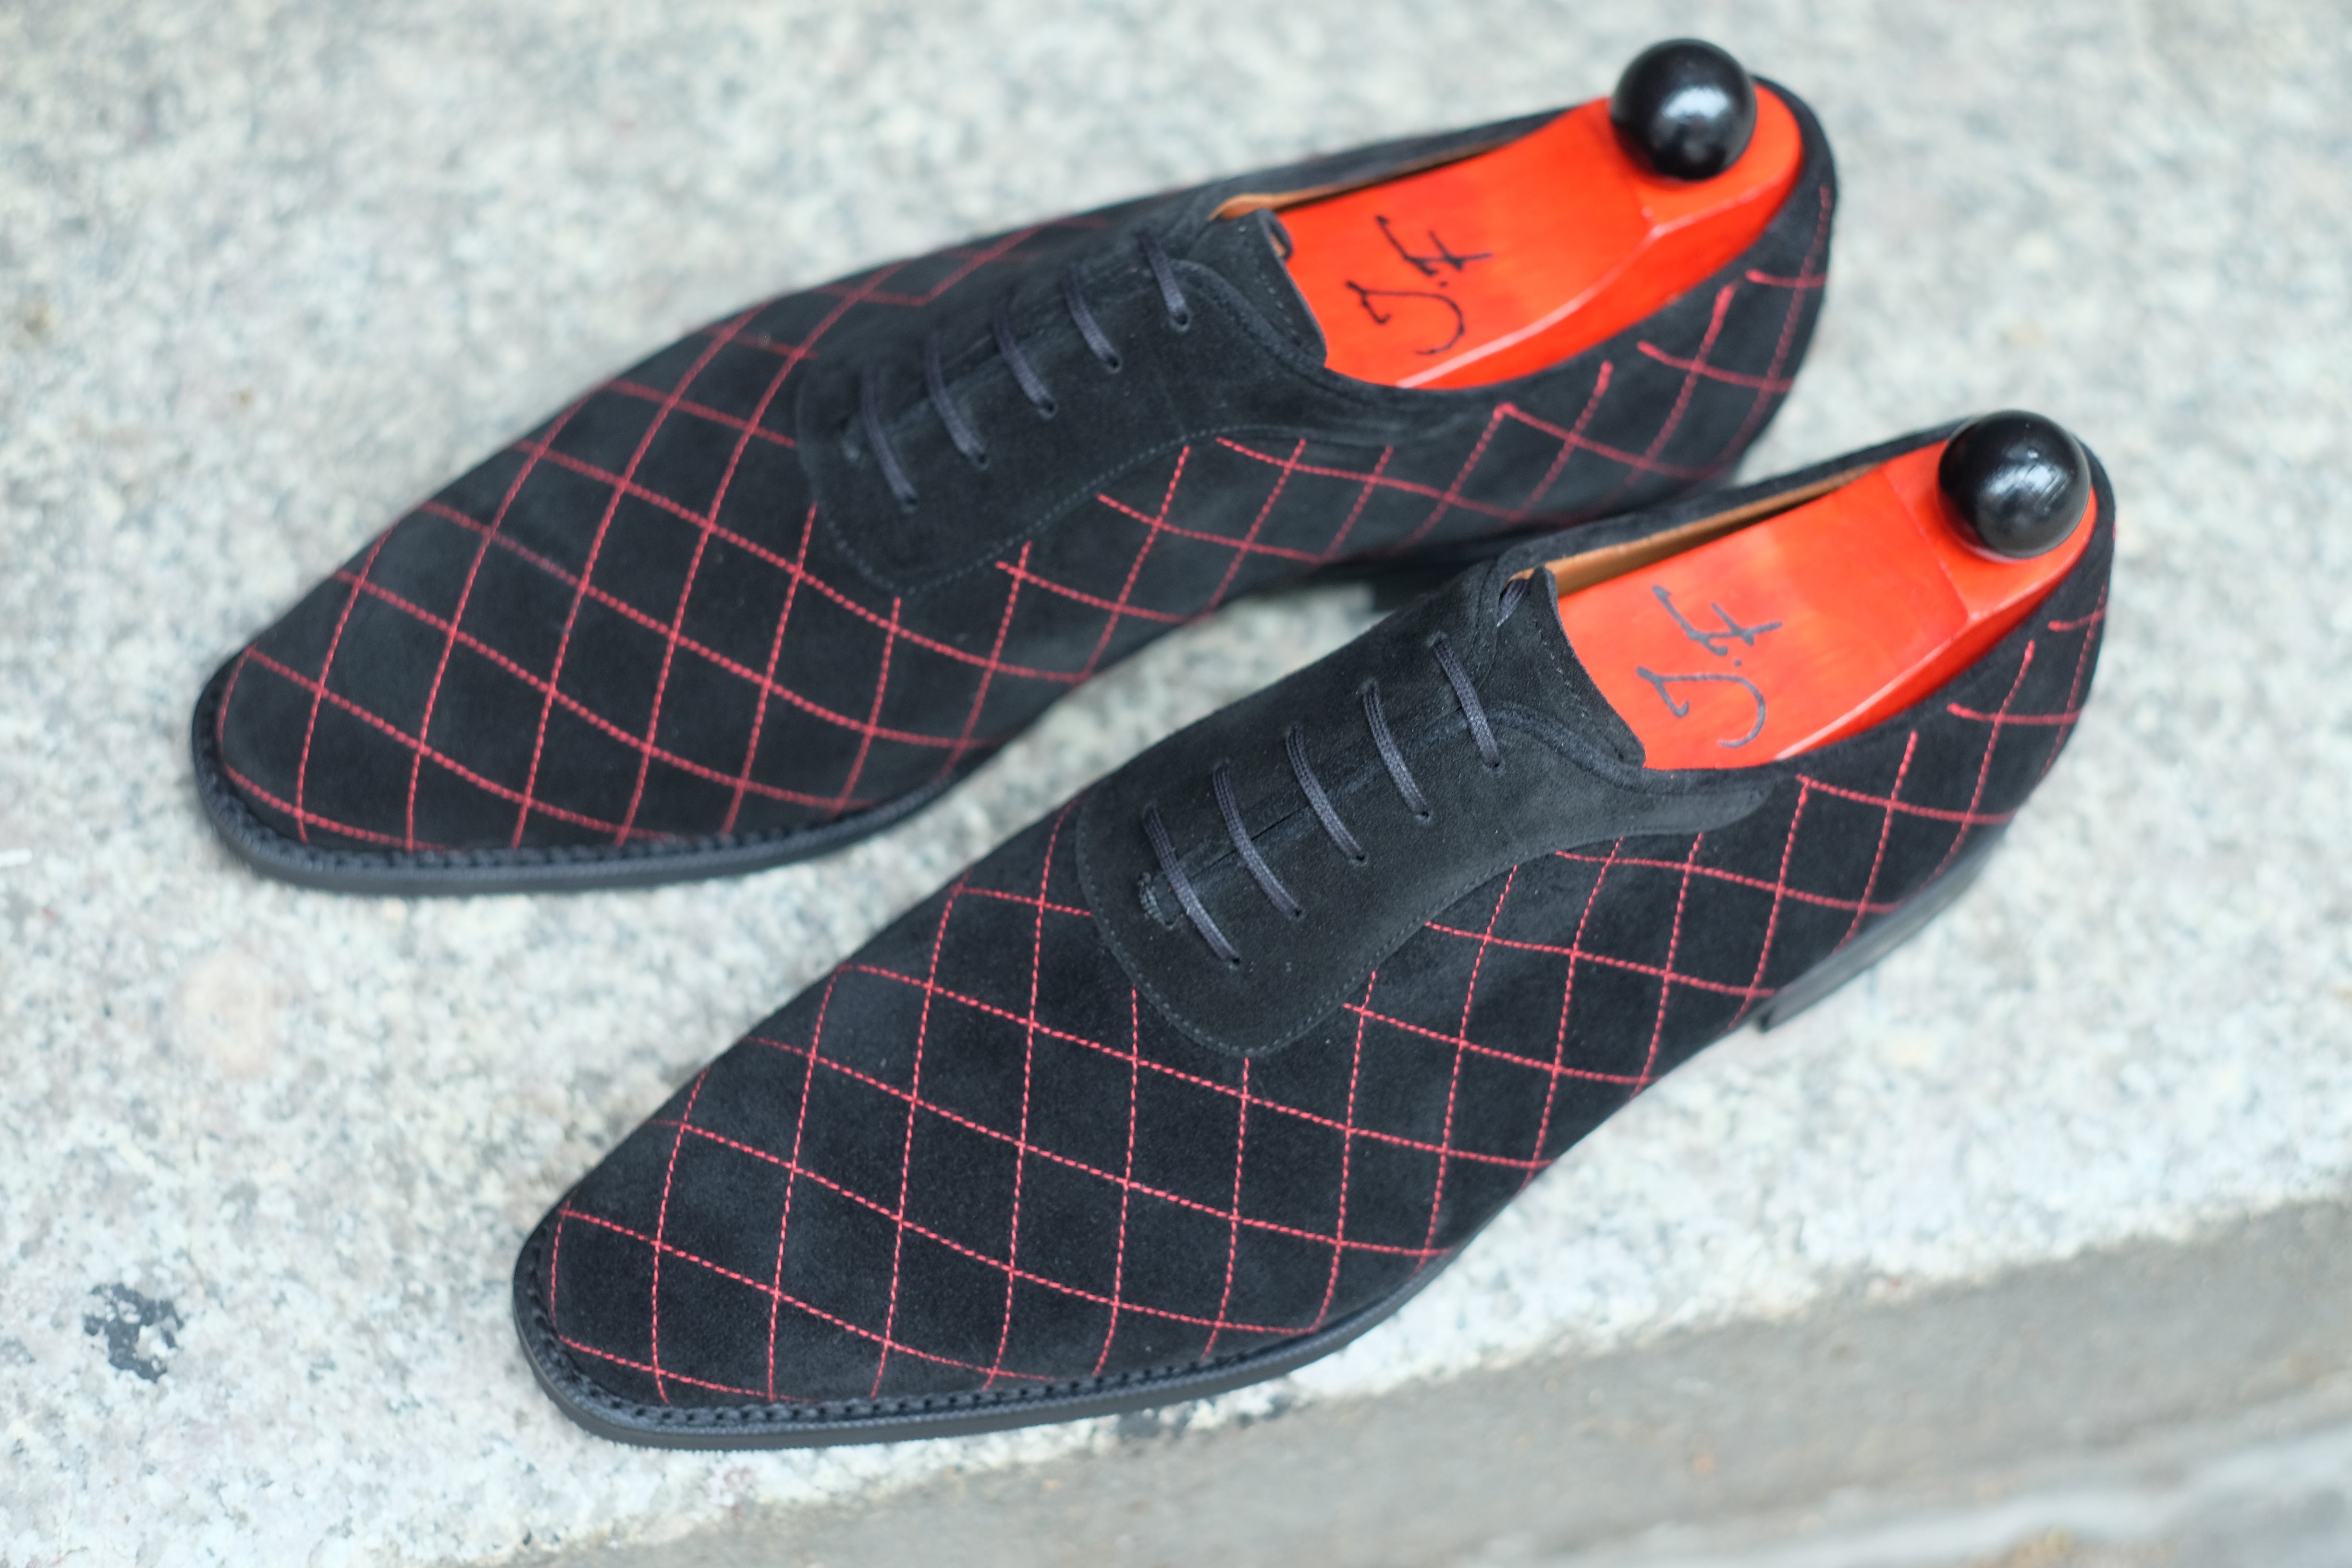 Spokane - MTO - Quilted Black Suede - Red Stitching - LPB Last - City Rubber Sole